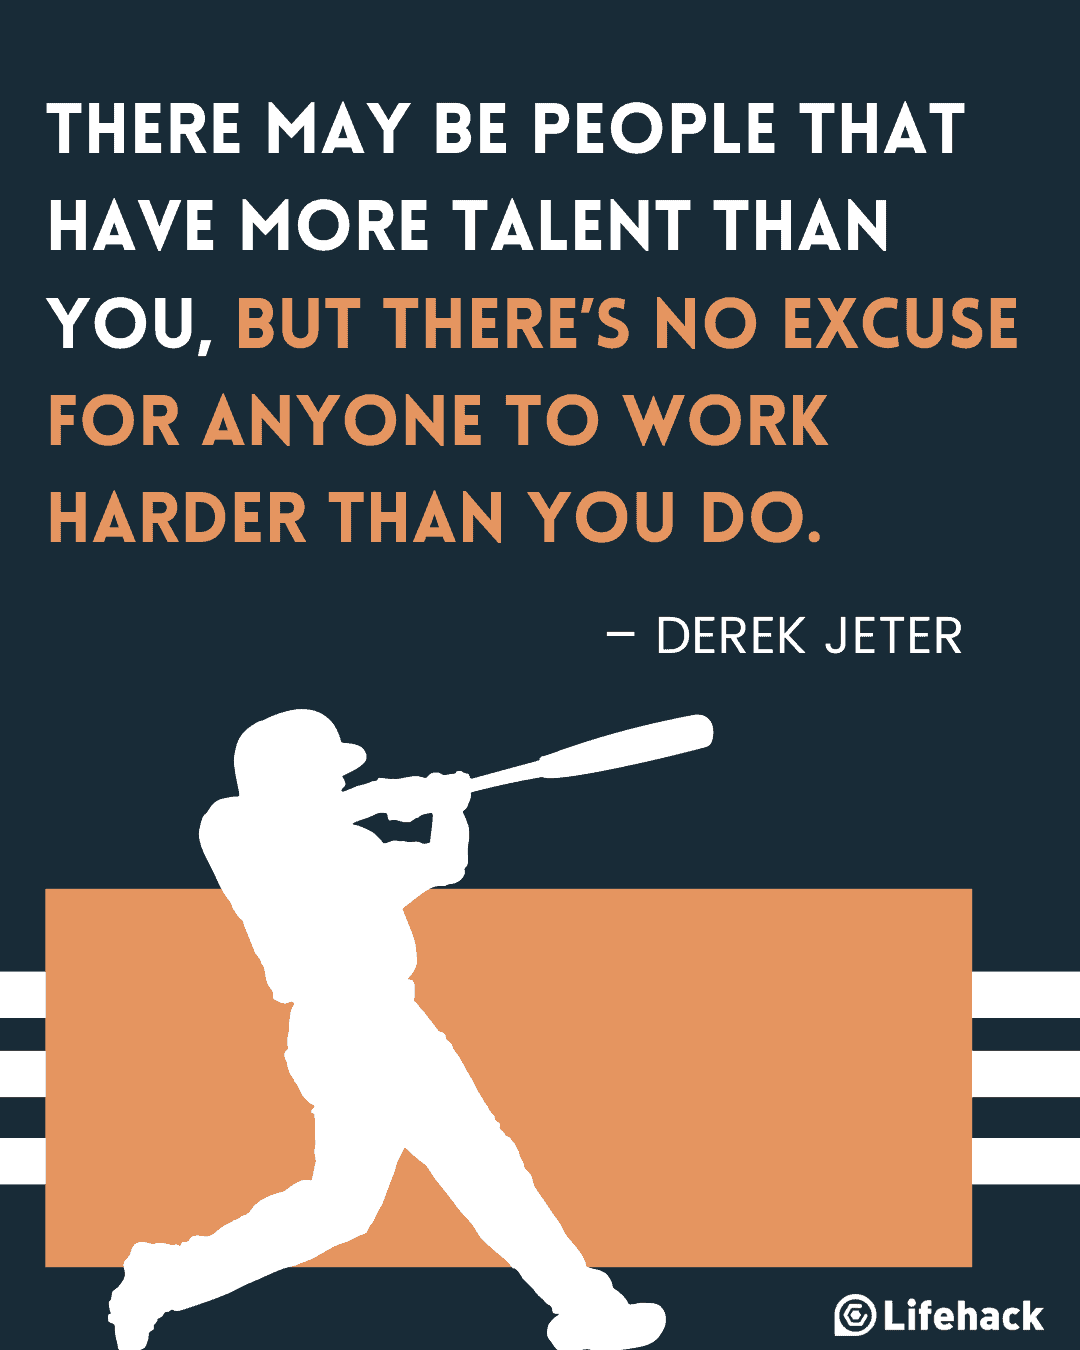 25 All-Time Best Inspirational Sports Quotes To Get You Going